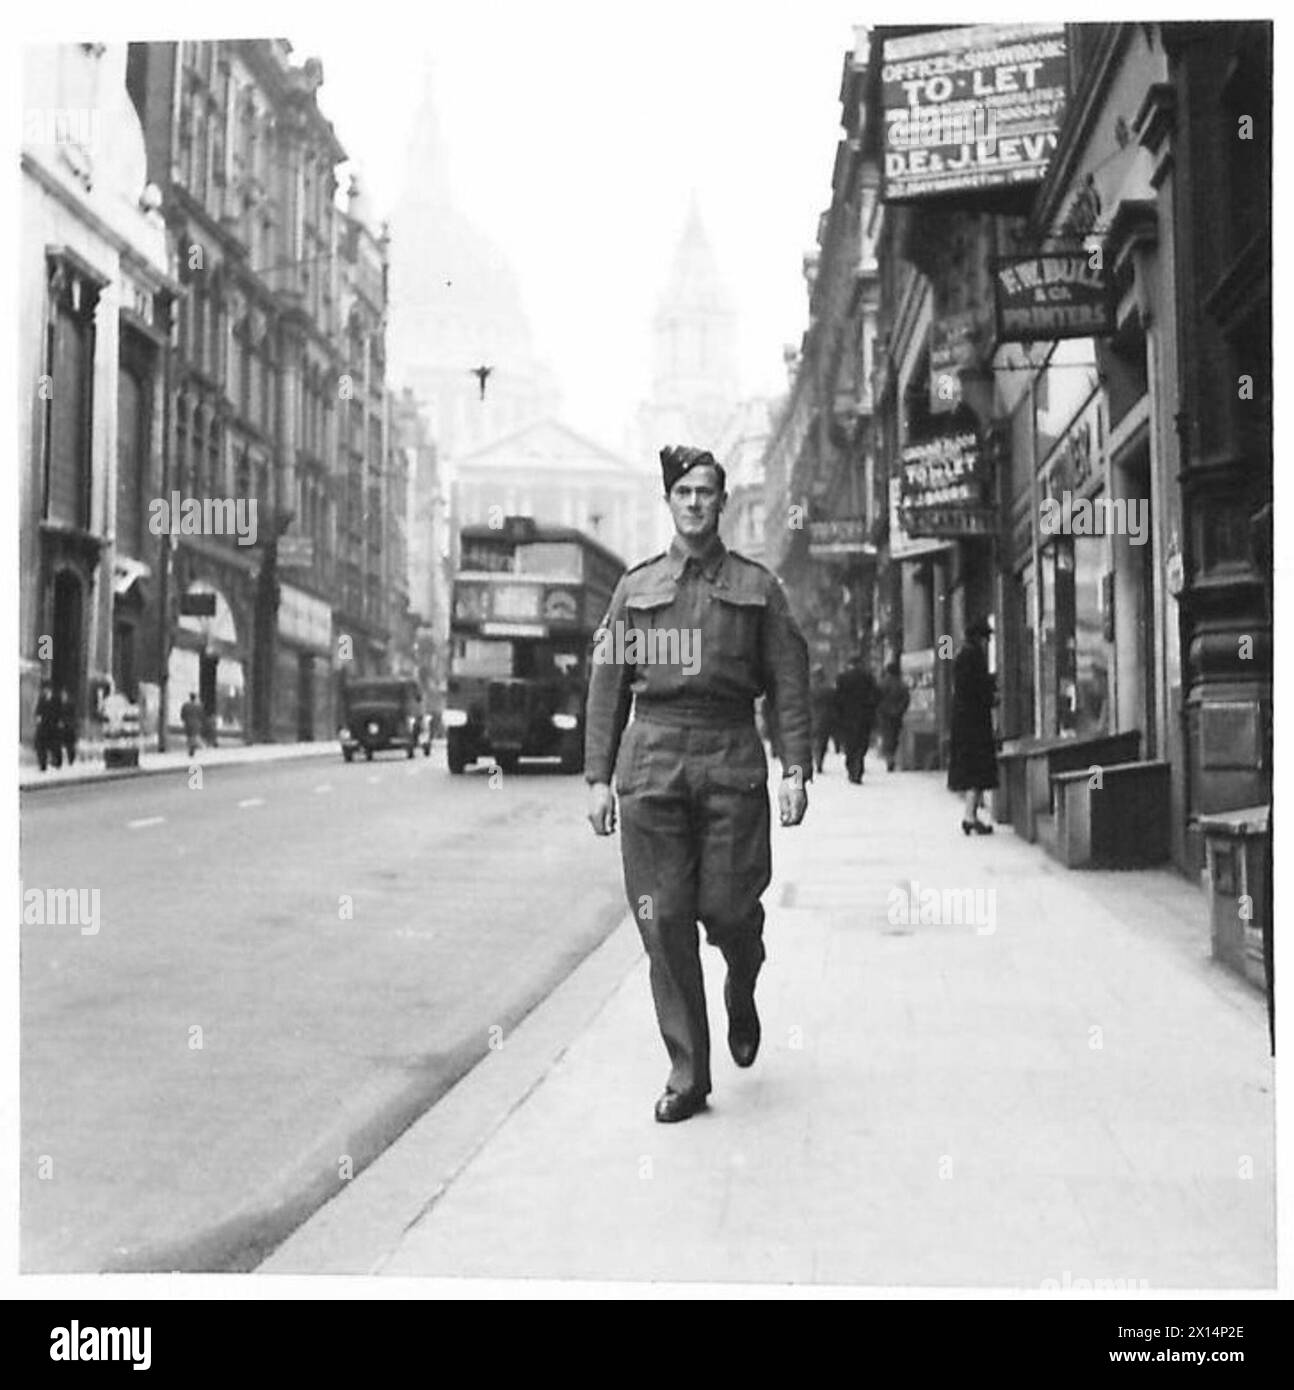 SERGEANT MAIL, DCM.,DESERT TANK BUSTER - Sgt. E.A. Mail DCM walking down Ludgate Hill British Army Stock Photo